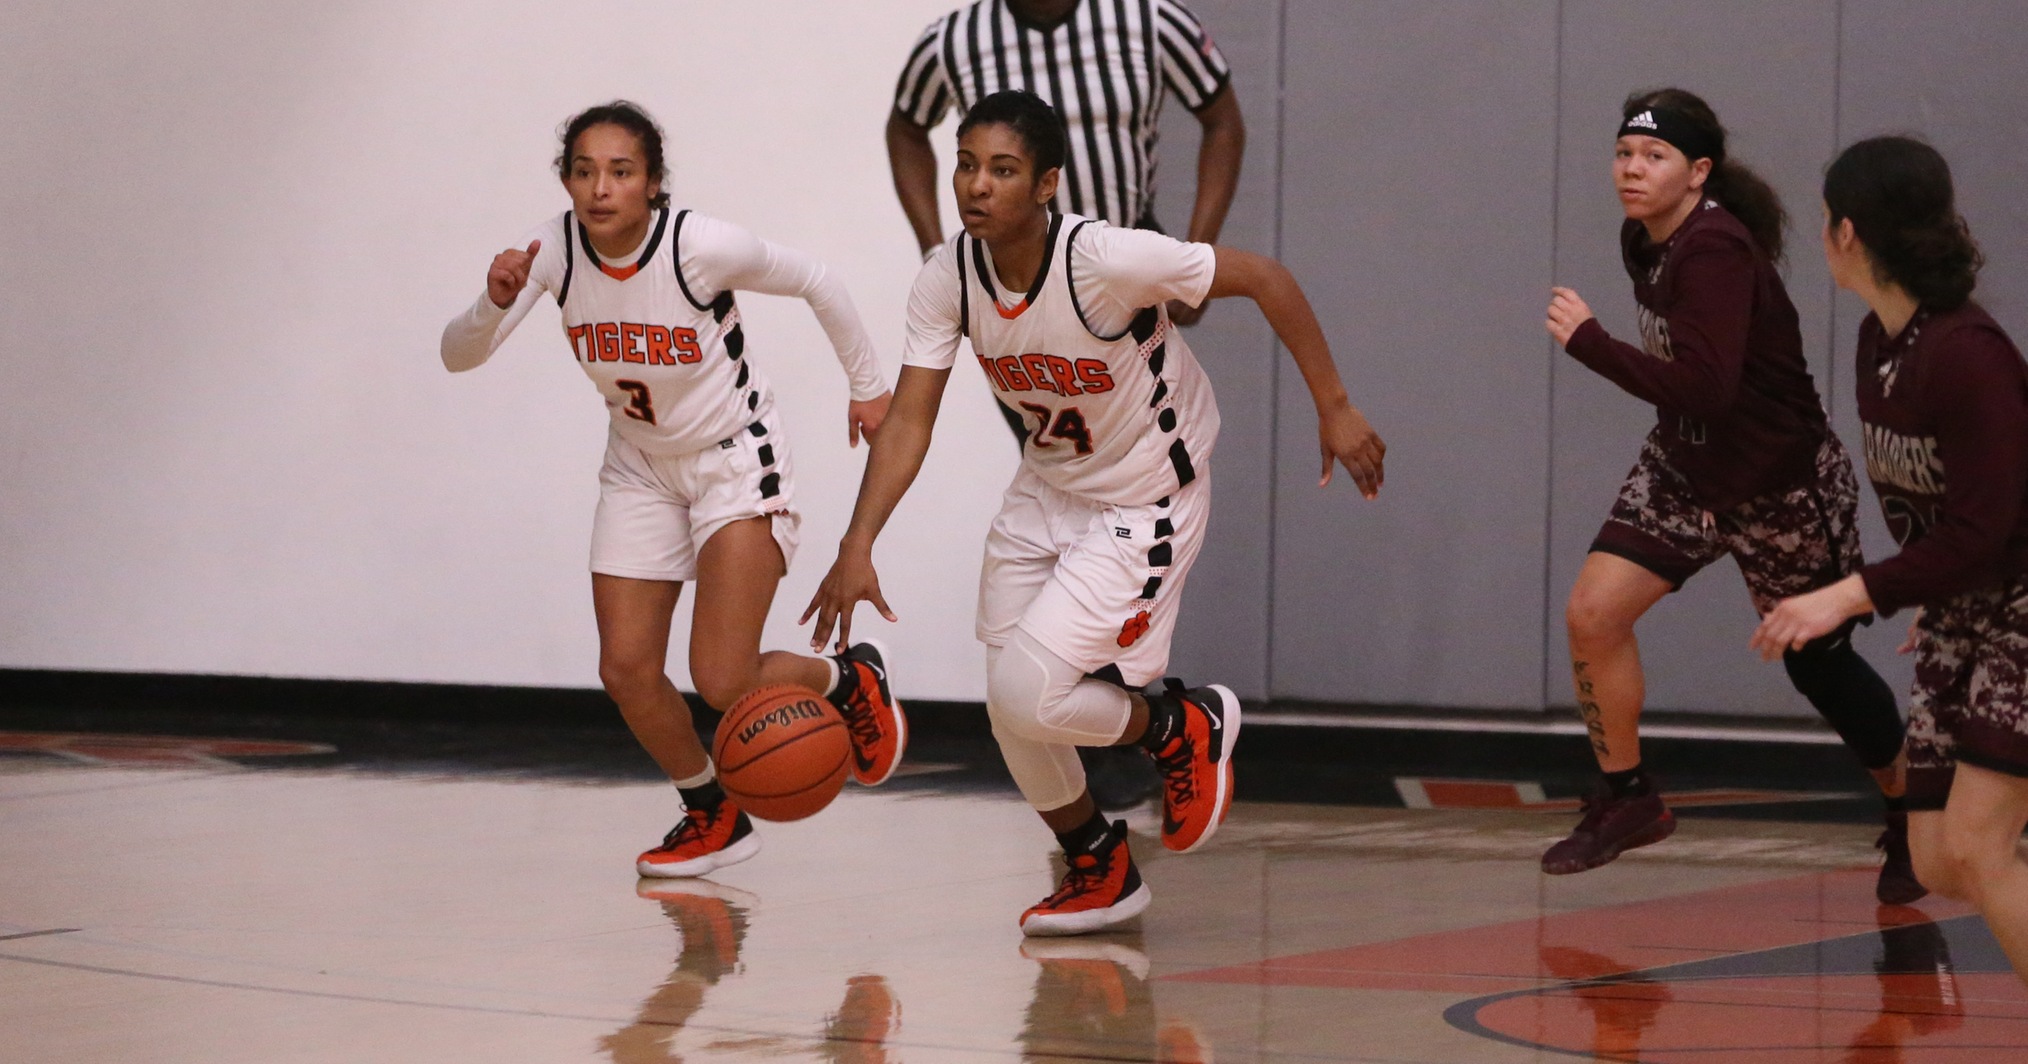 Trinity Vasquez dropped 43 points, the second-highest single game scoring marking RCC women's basketball history, in a victory over Antelope Valley. (Photo by Bobby R. Hester)